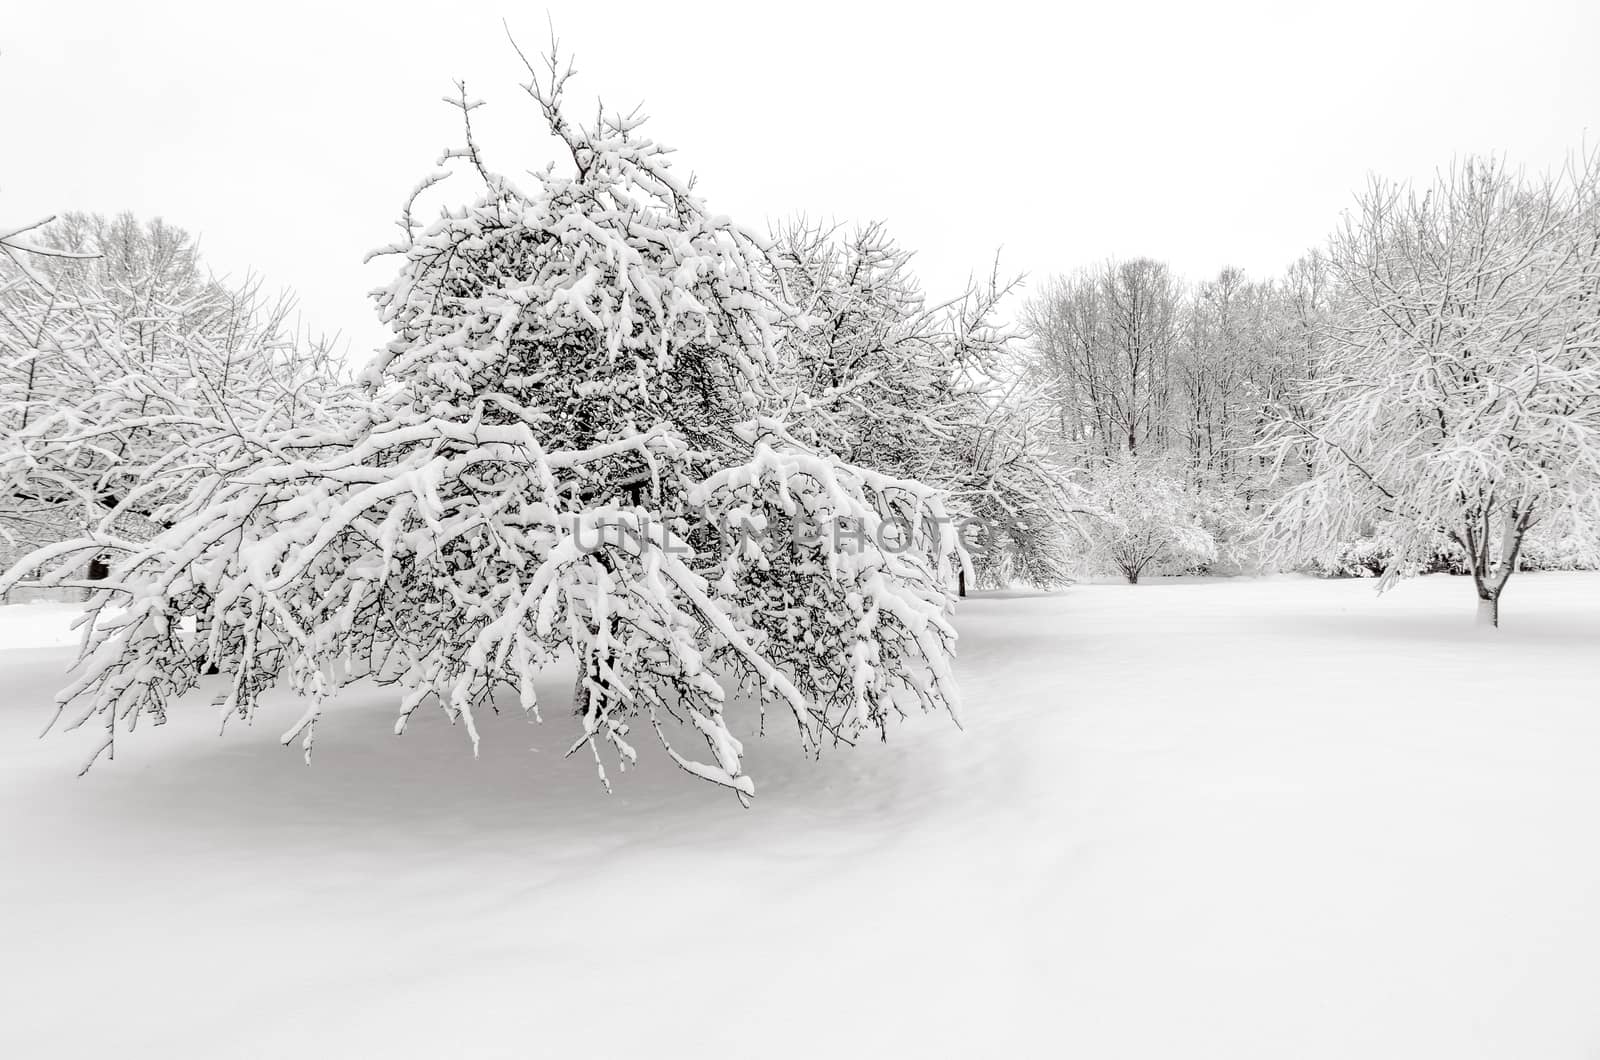 Winter, apple trees with snow after snowfall